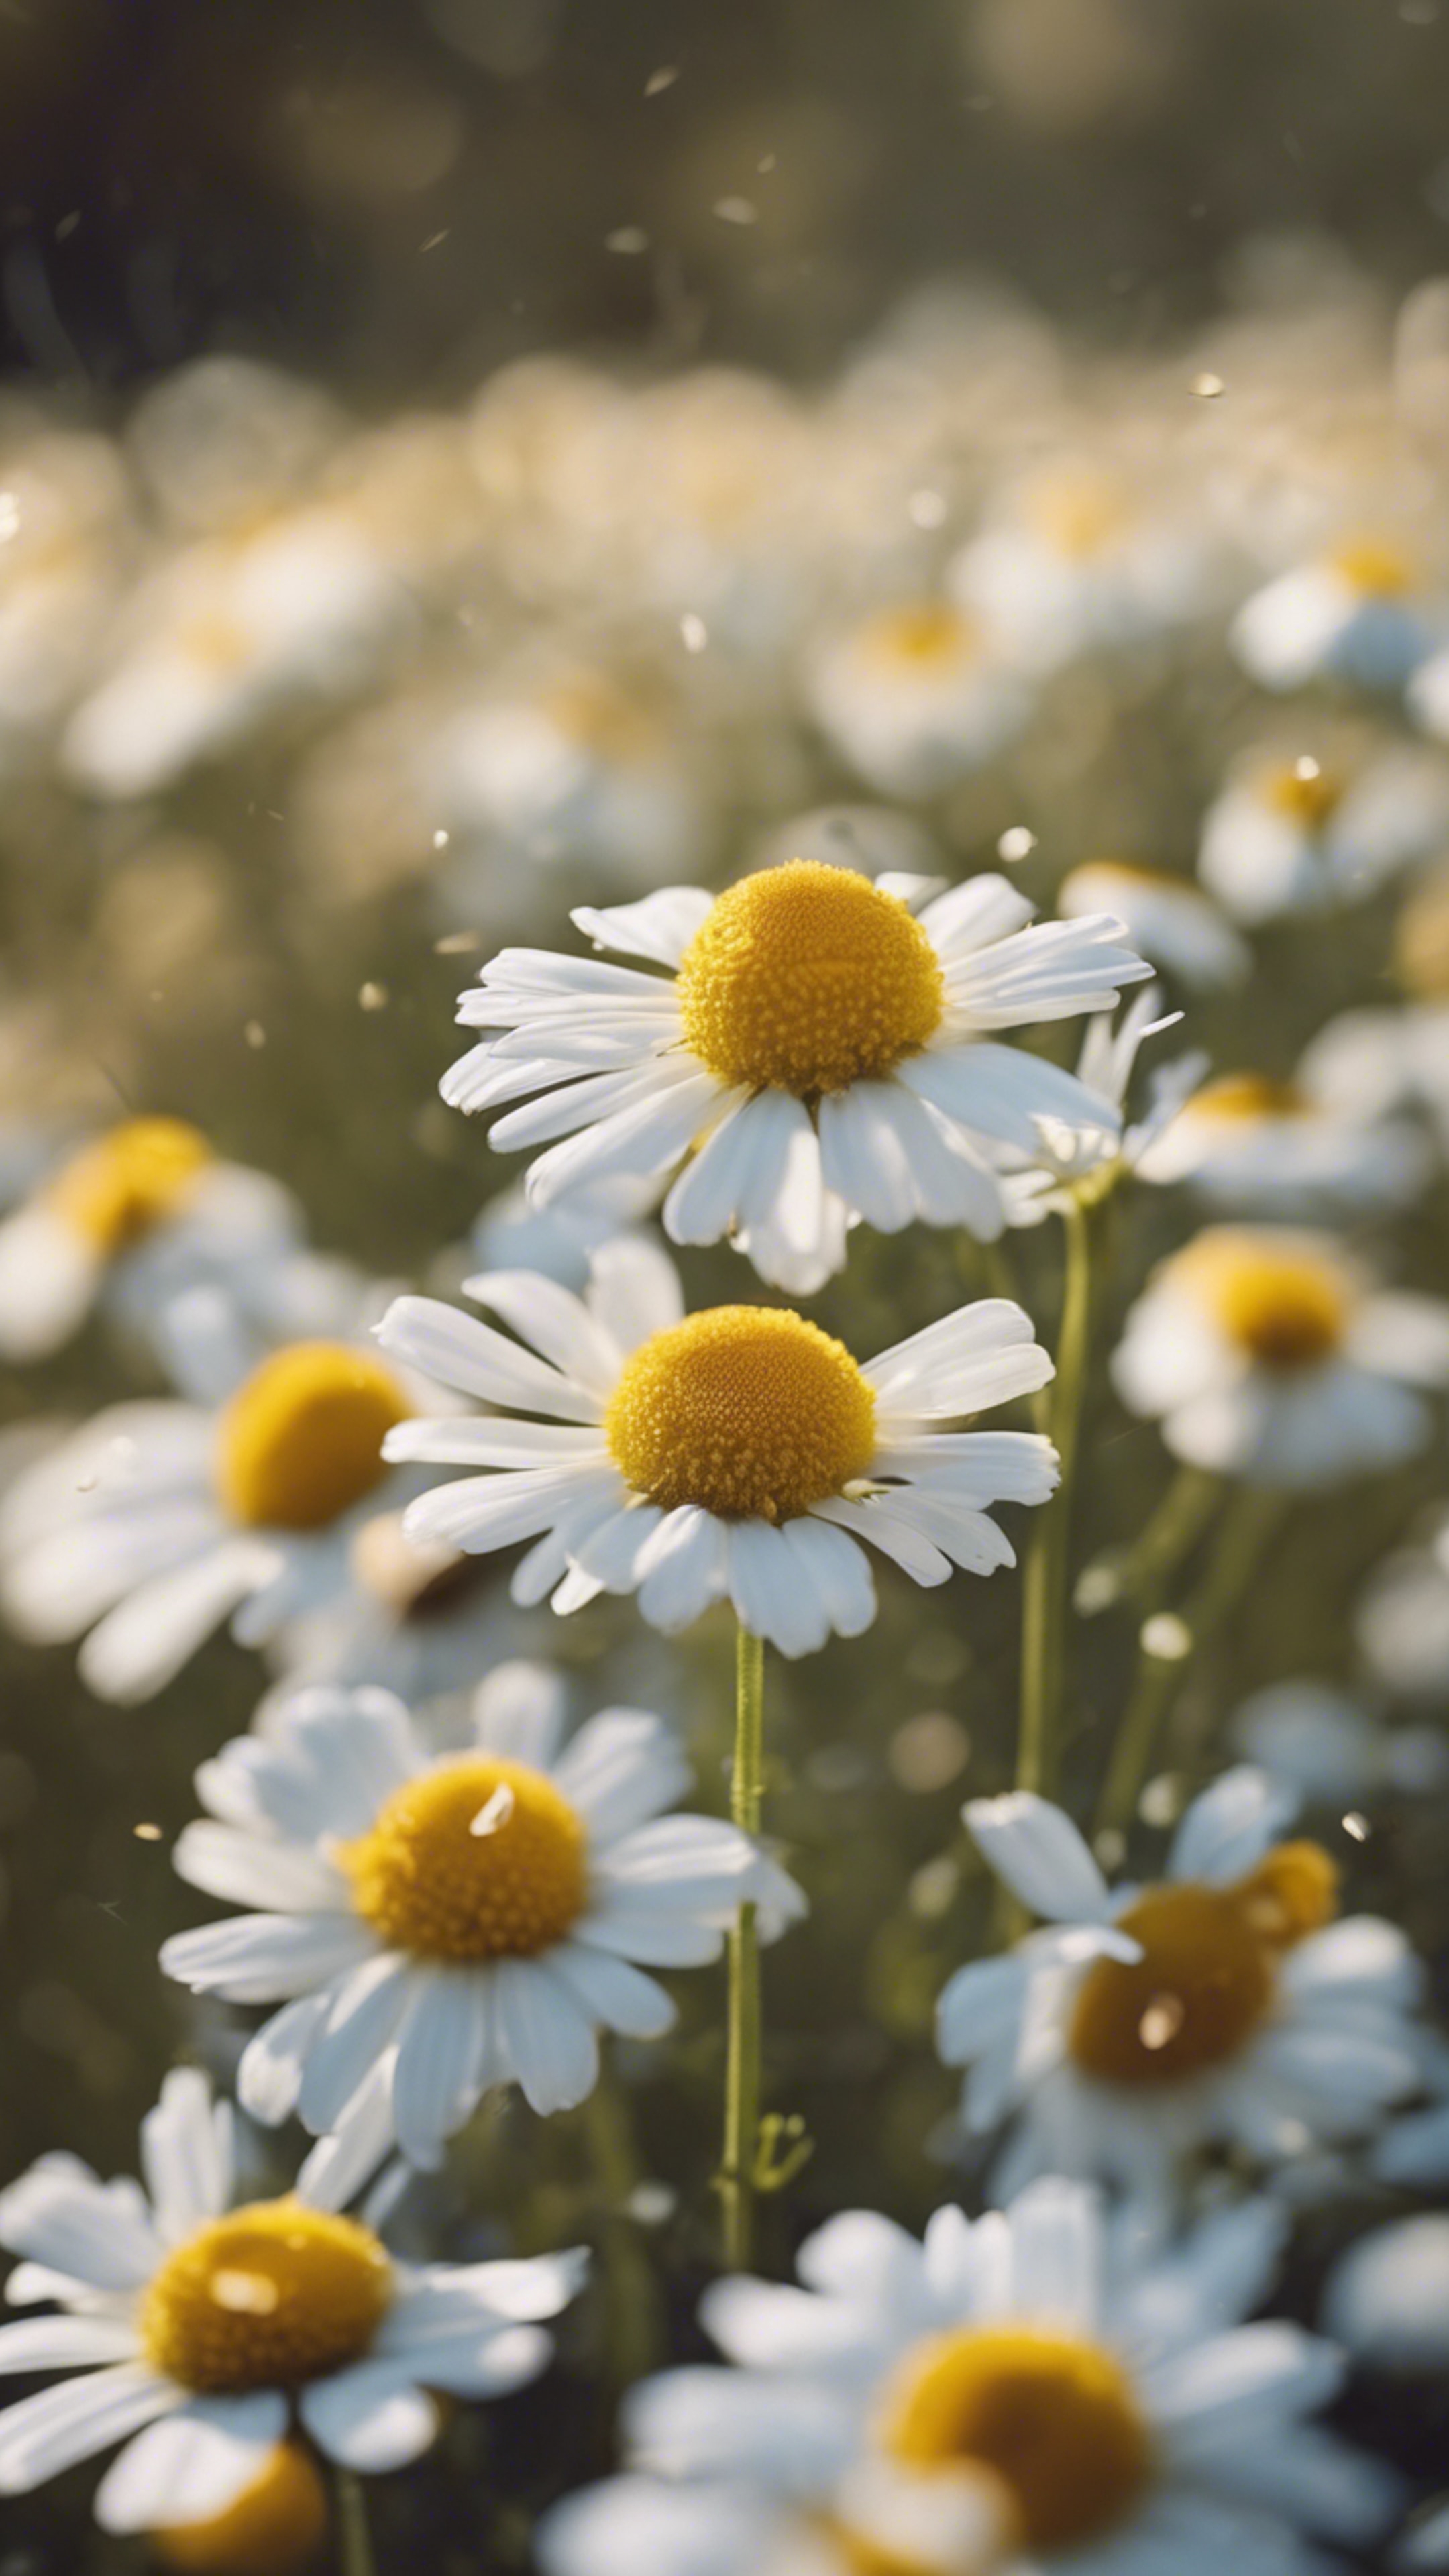 A dense field of chamomile flowers bathed in soft morning sunlight. Tapeta[24173eec96654bd5b545]